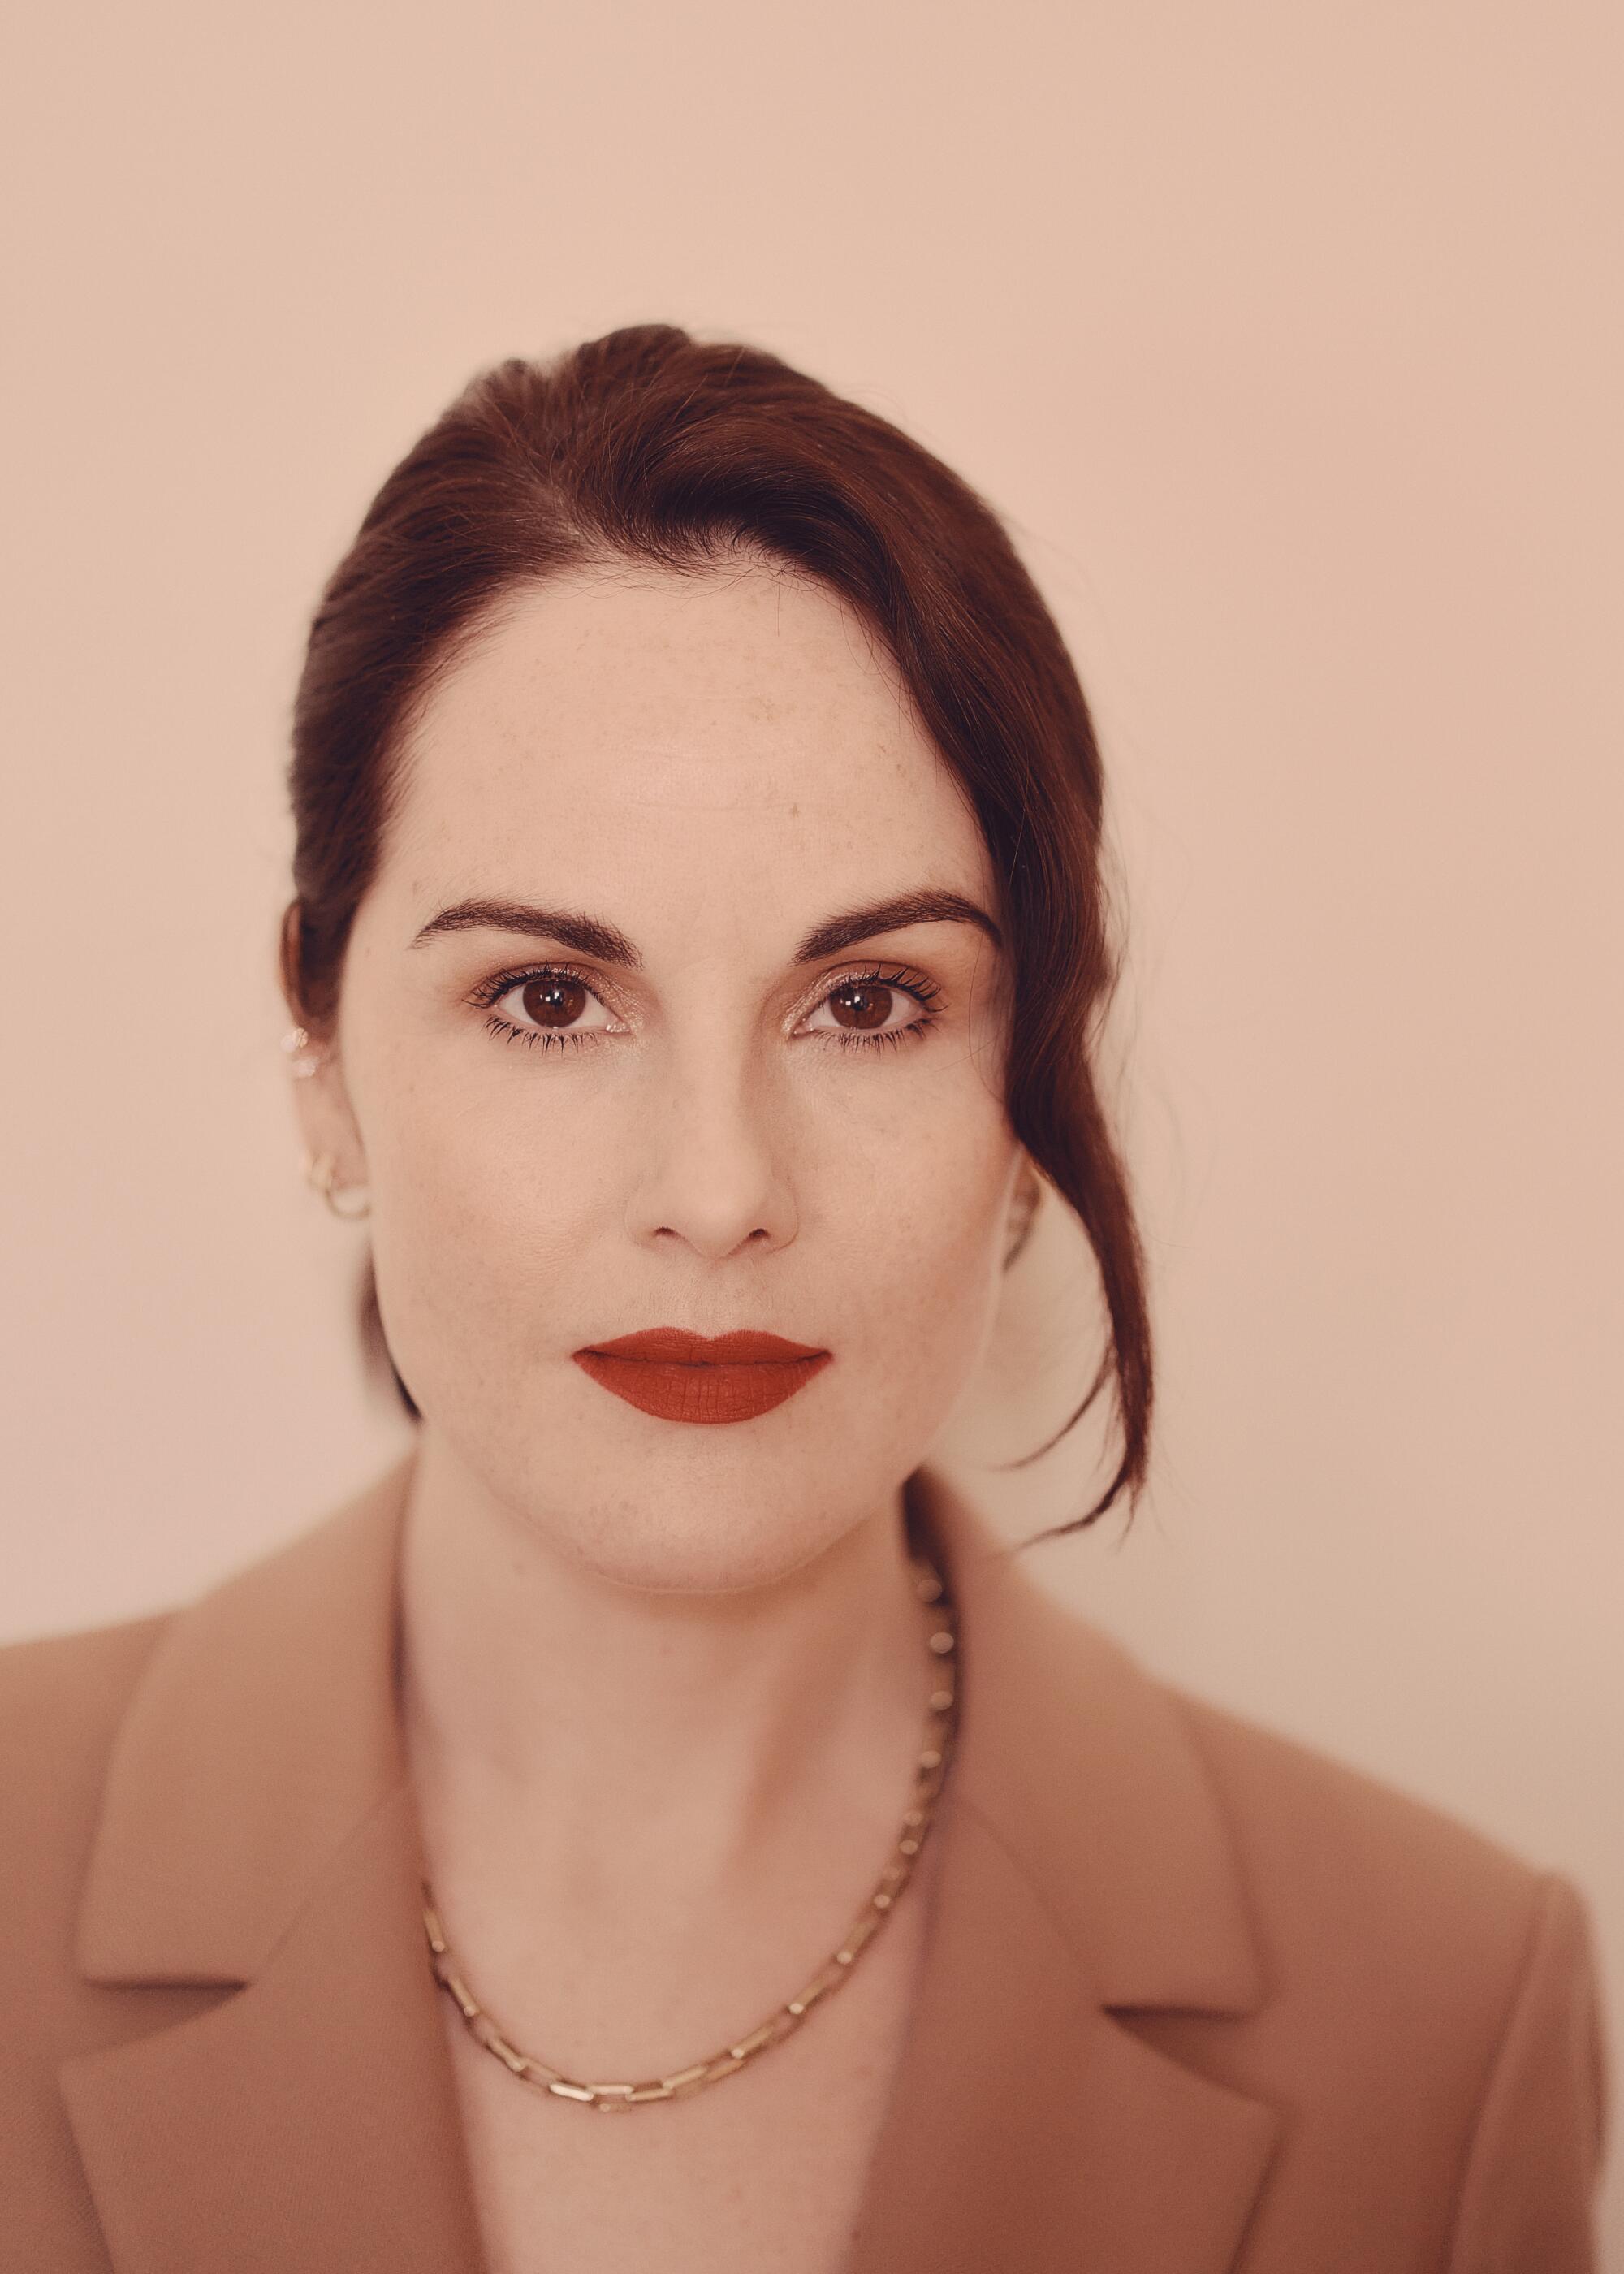 Downton Abbey's Michelle Dockery Is Obsessed with Real Housewives